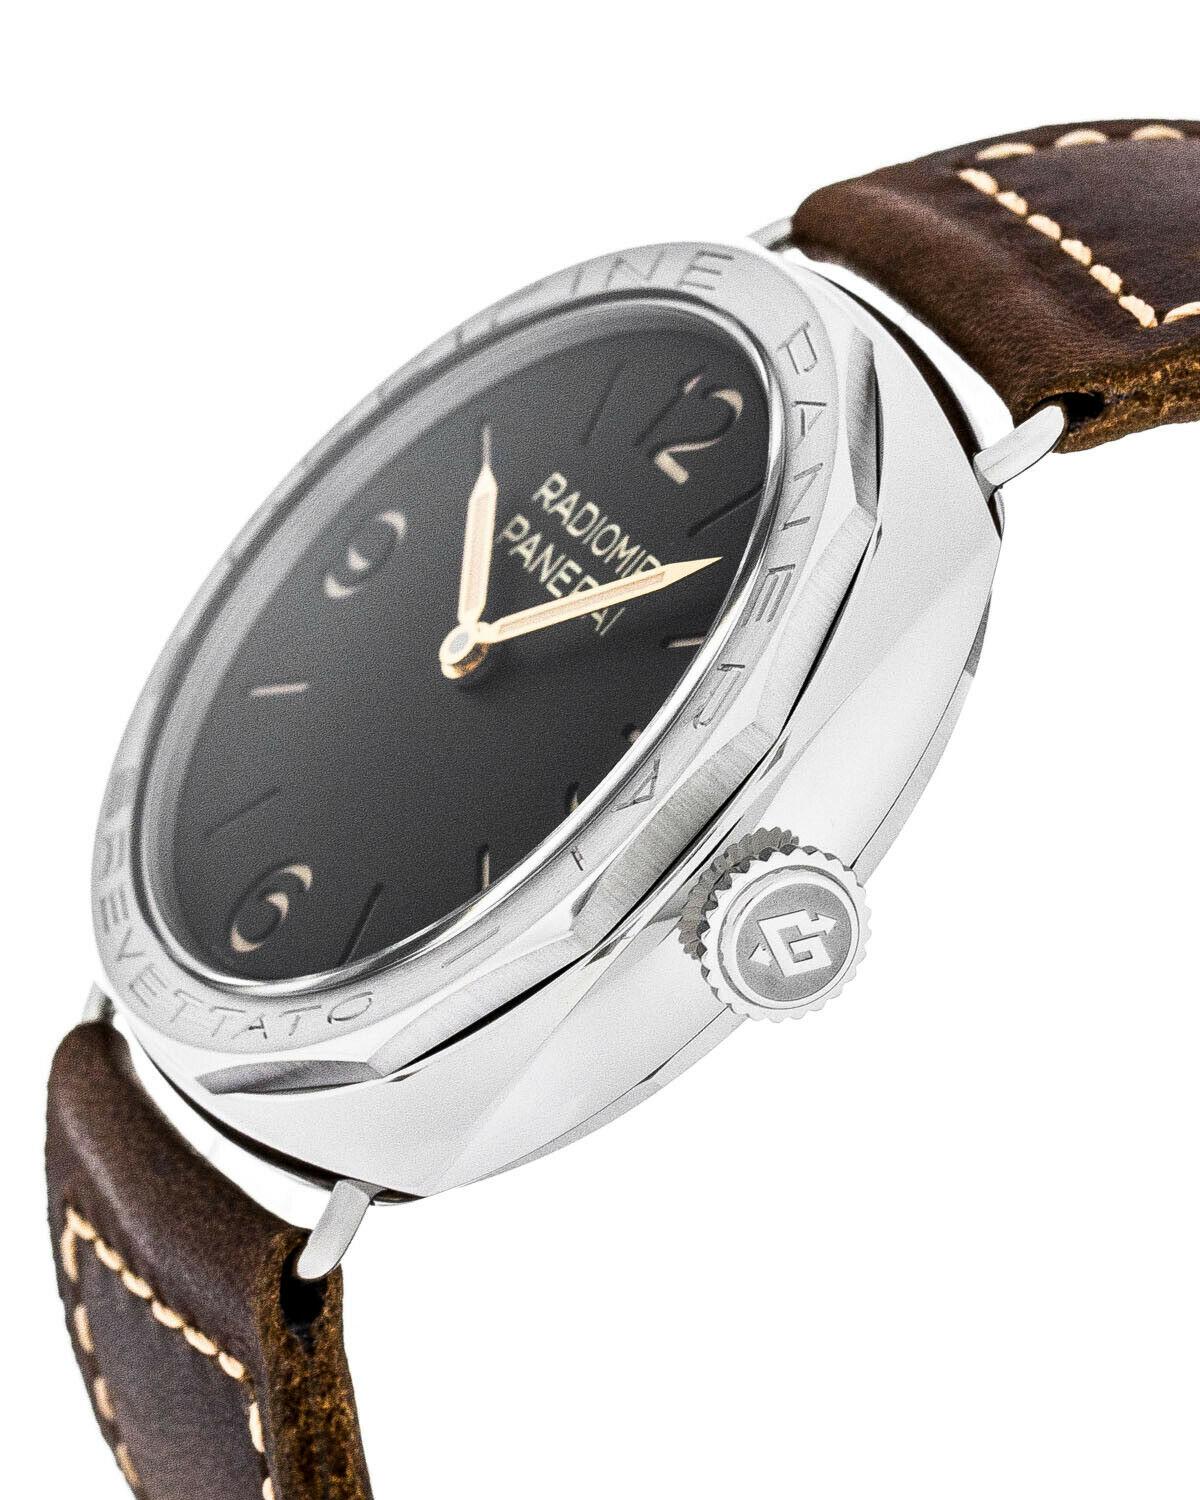 Contemporary Panerai Radiomir 3 Days PAM00685 Hand Winding Watch Box&Papers Limited Ed. For Sale